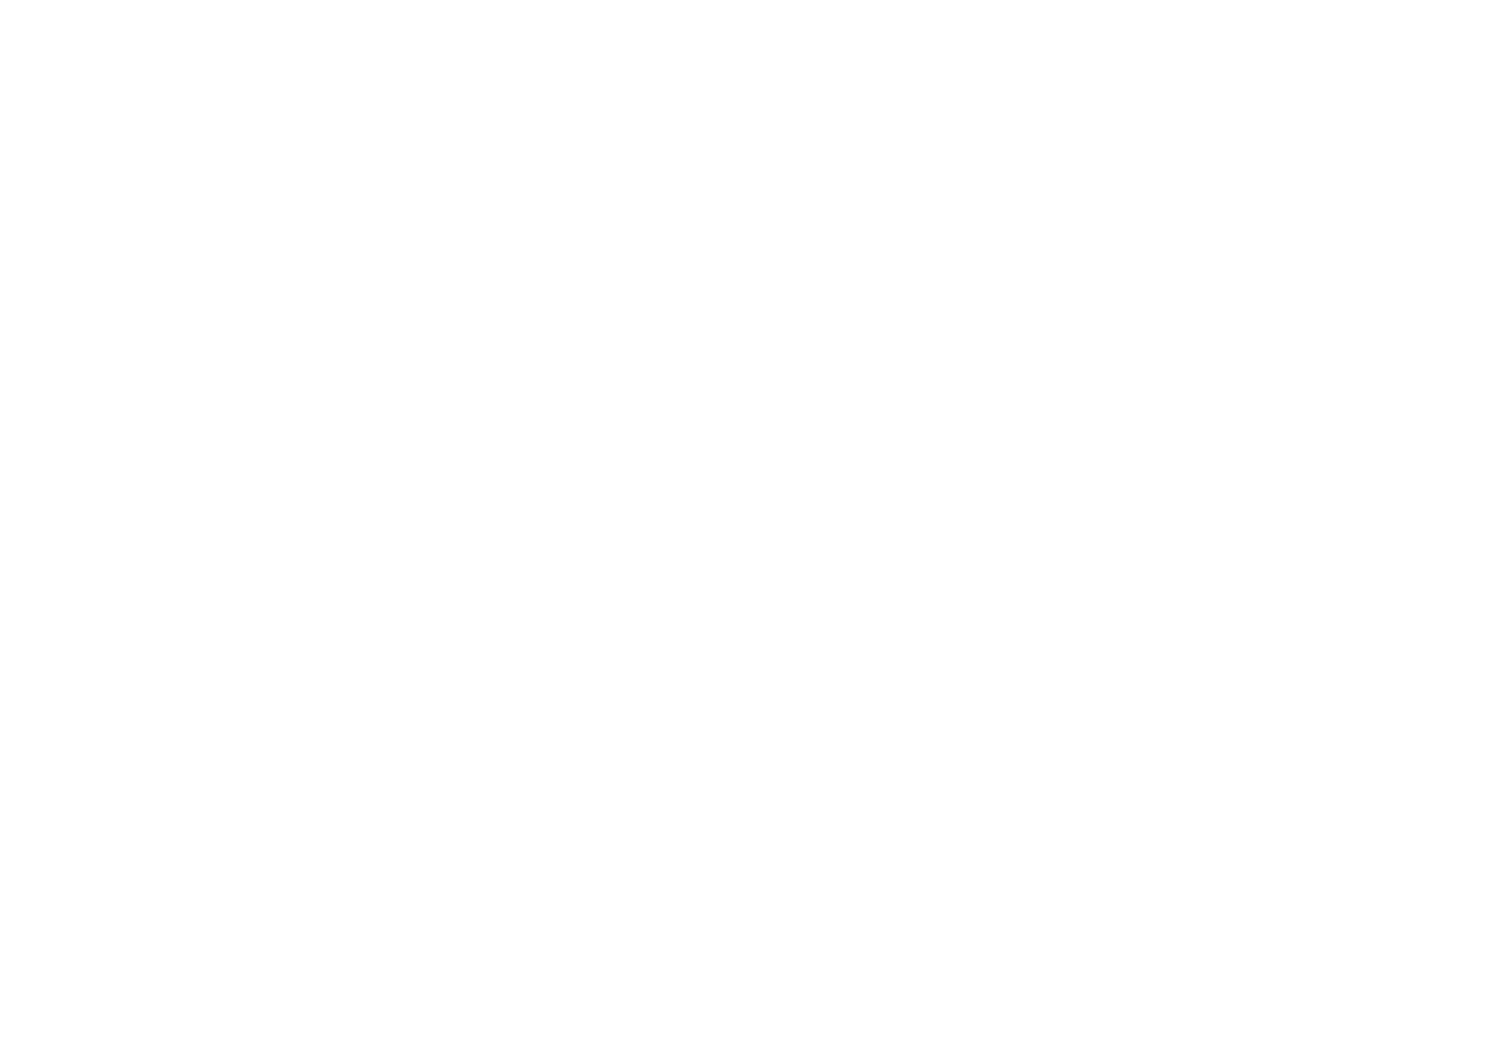 We are group